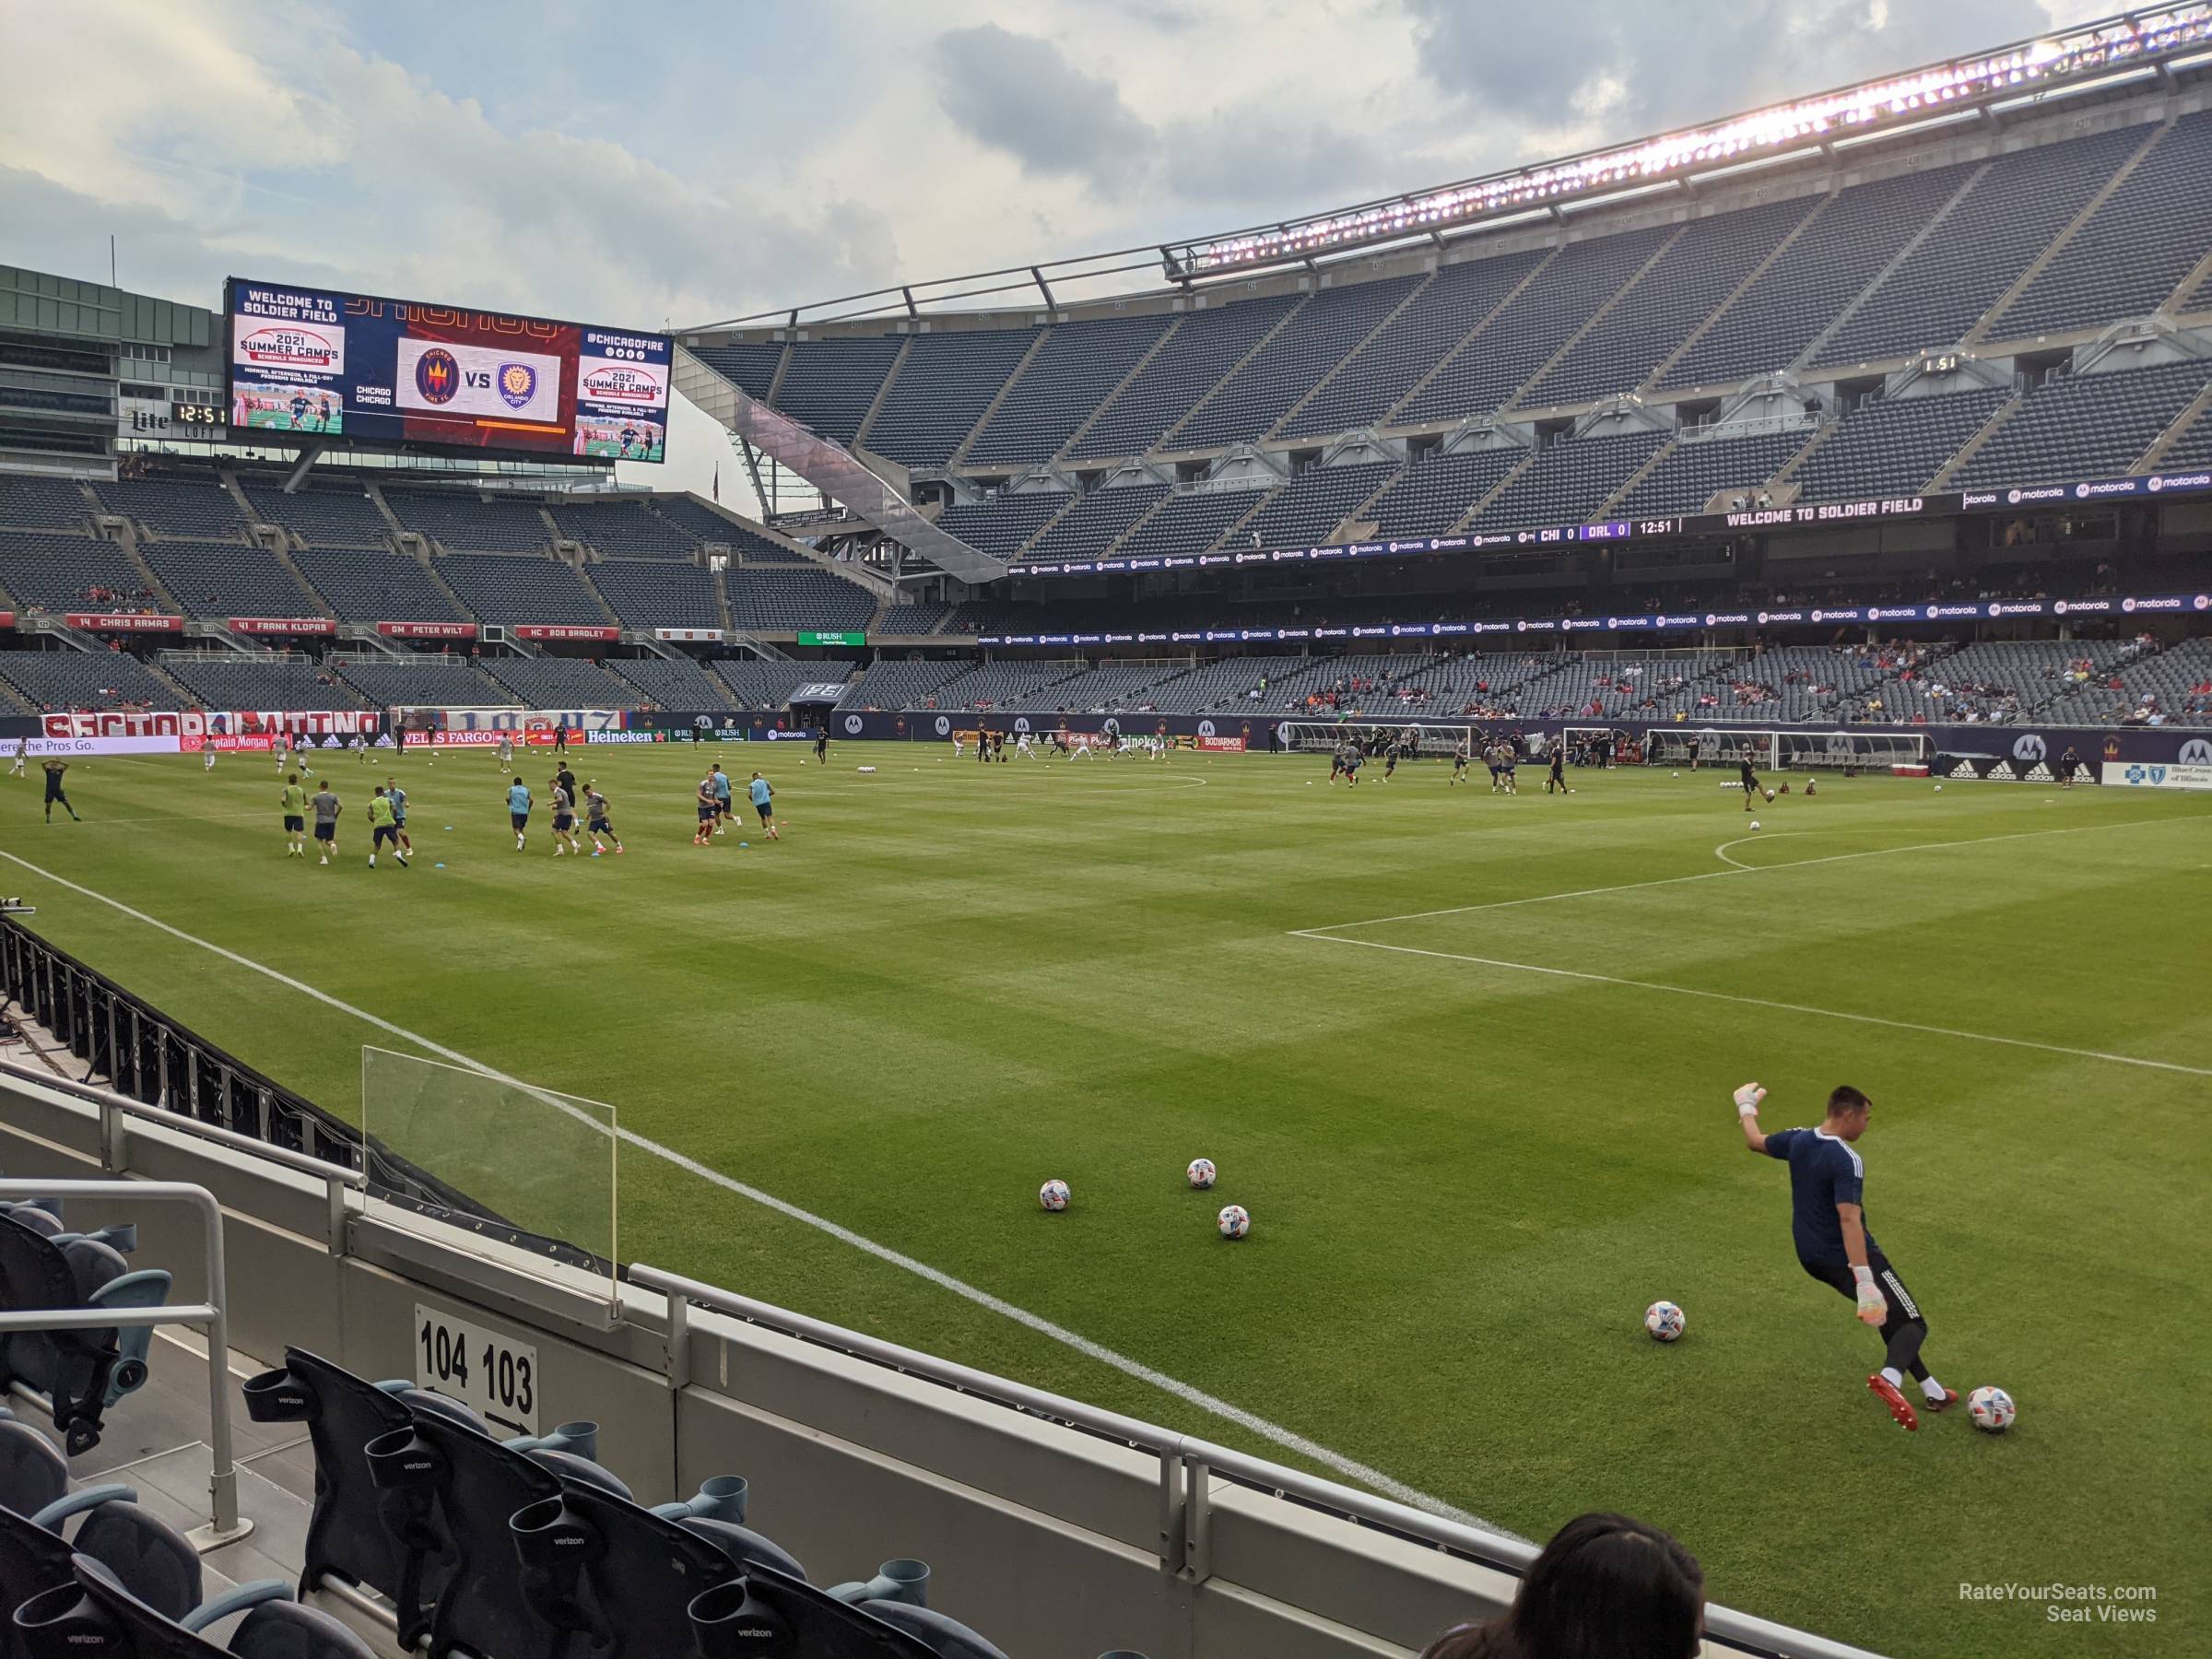 section 103, row 4 seat view  for soccer - soldier field